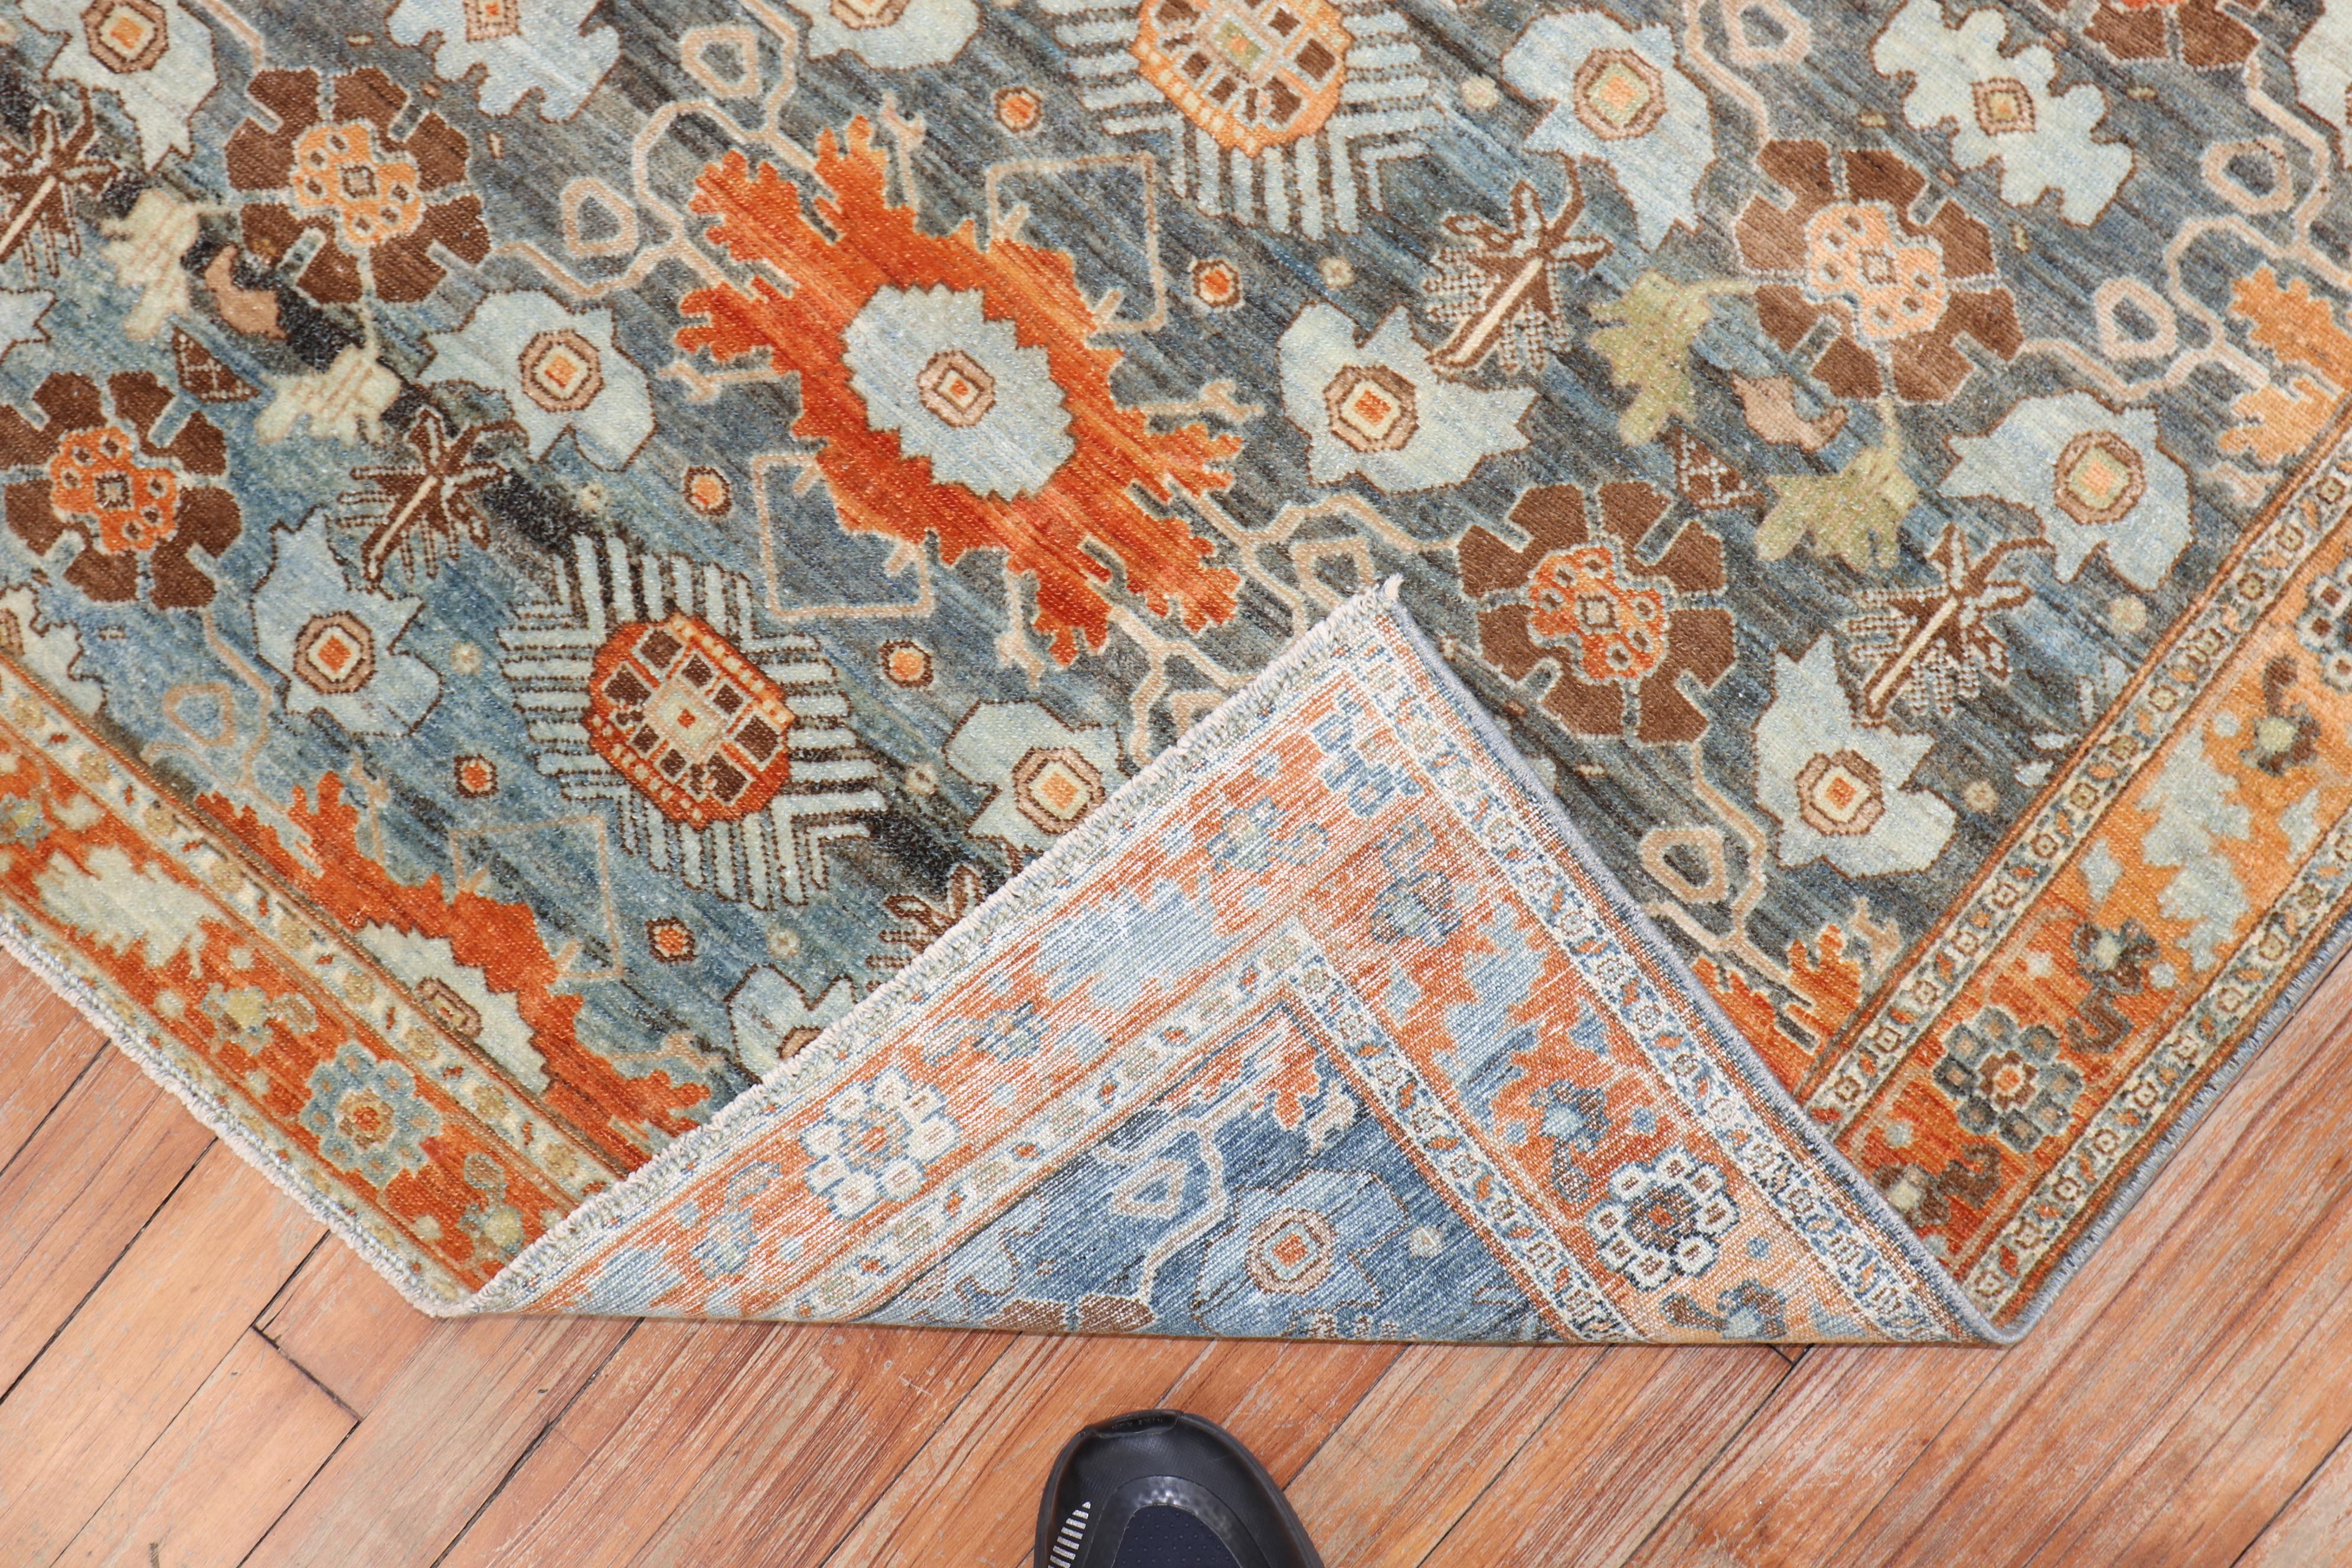 an early 20th century Persian scatter size rug

Measures: 3'7